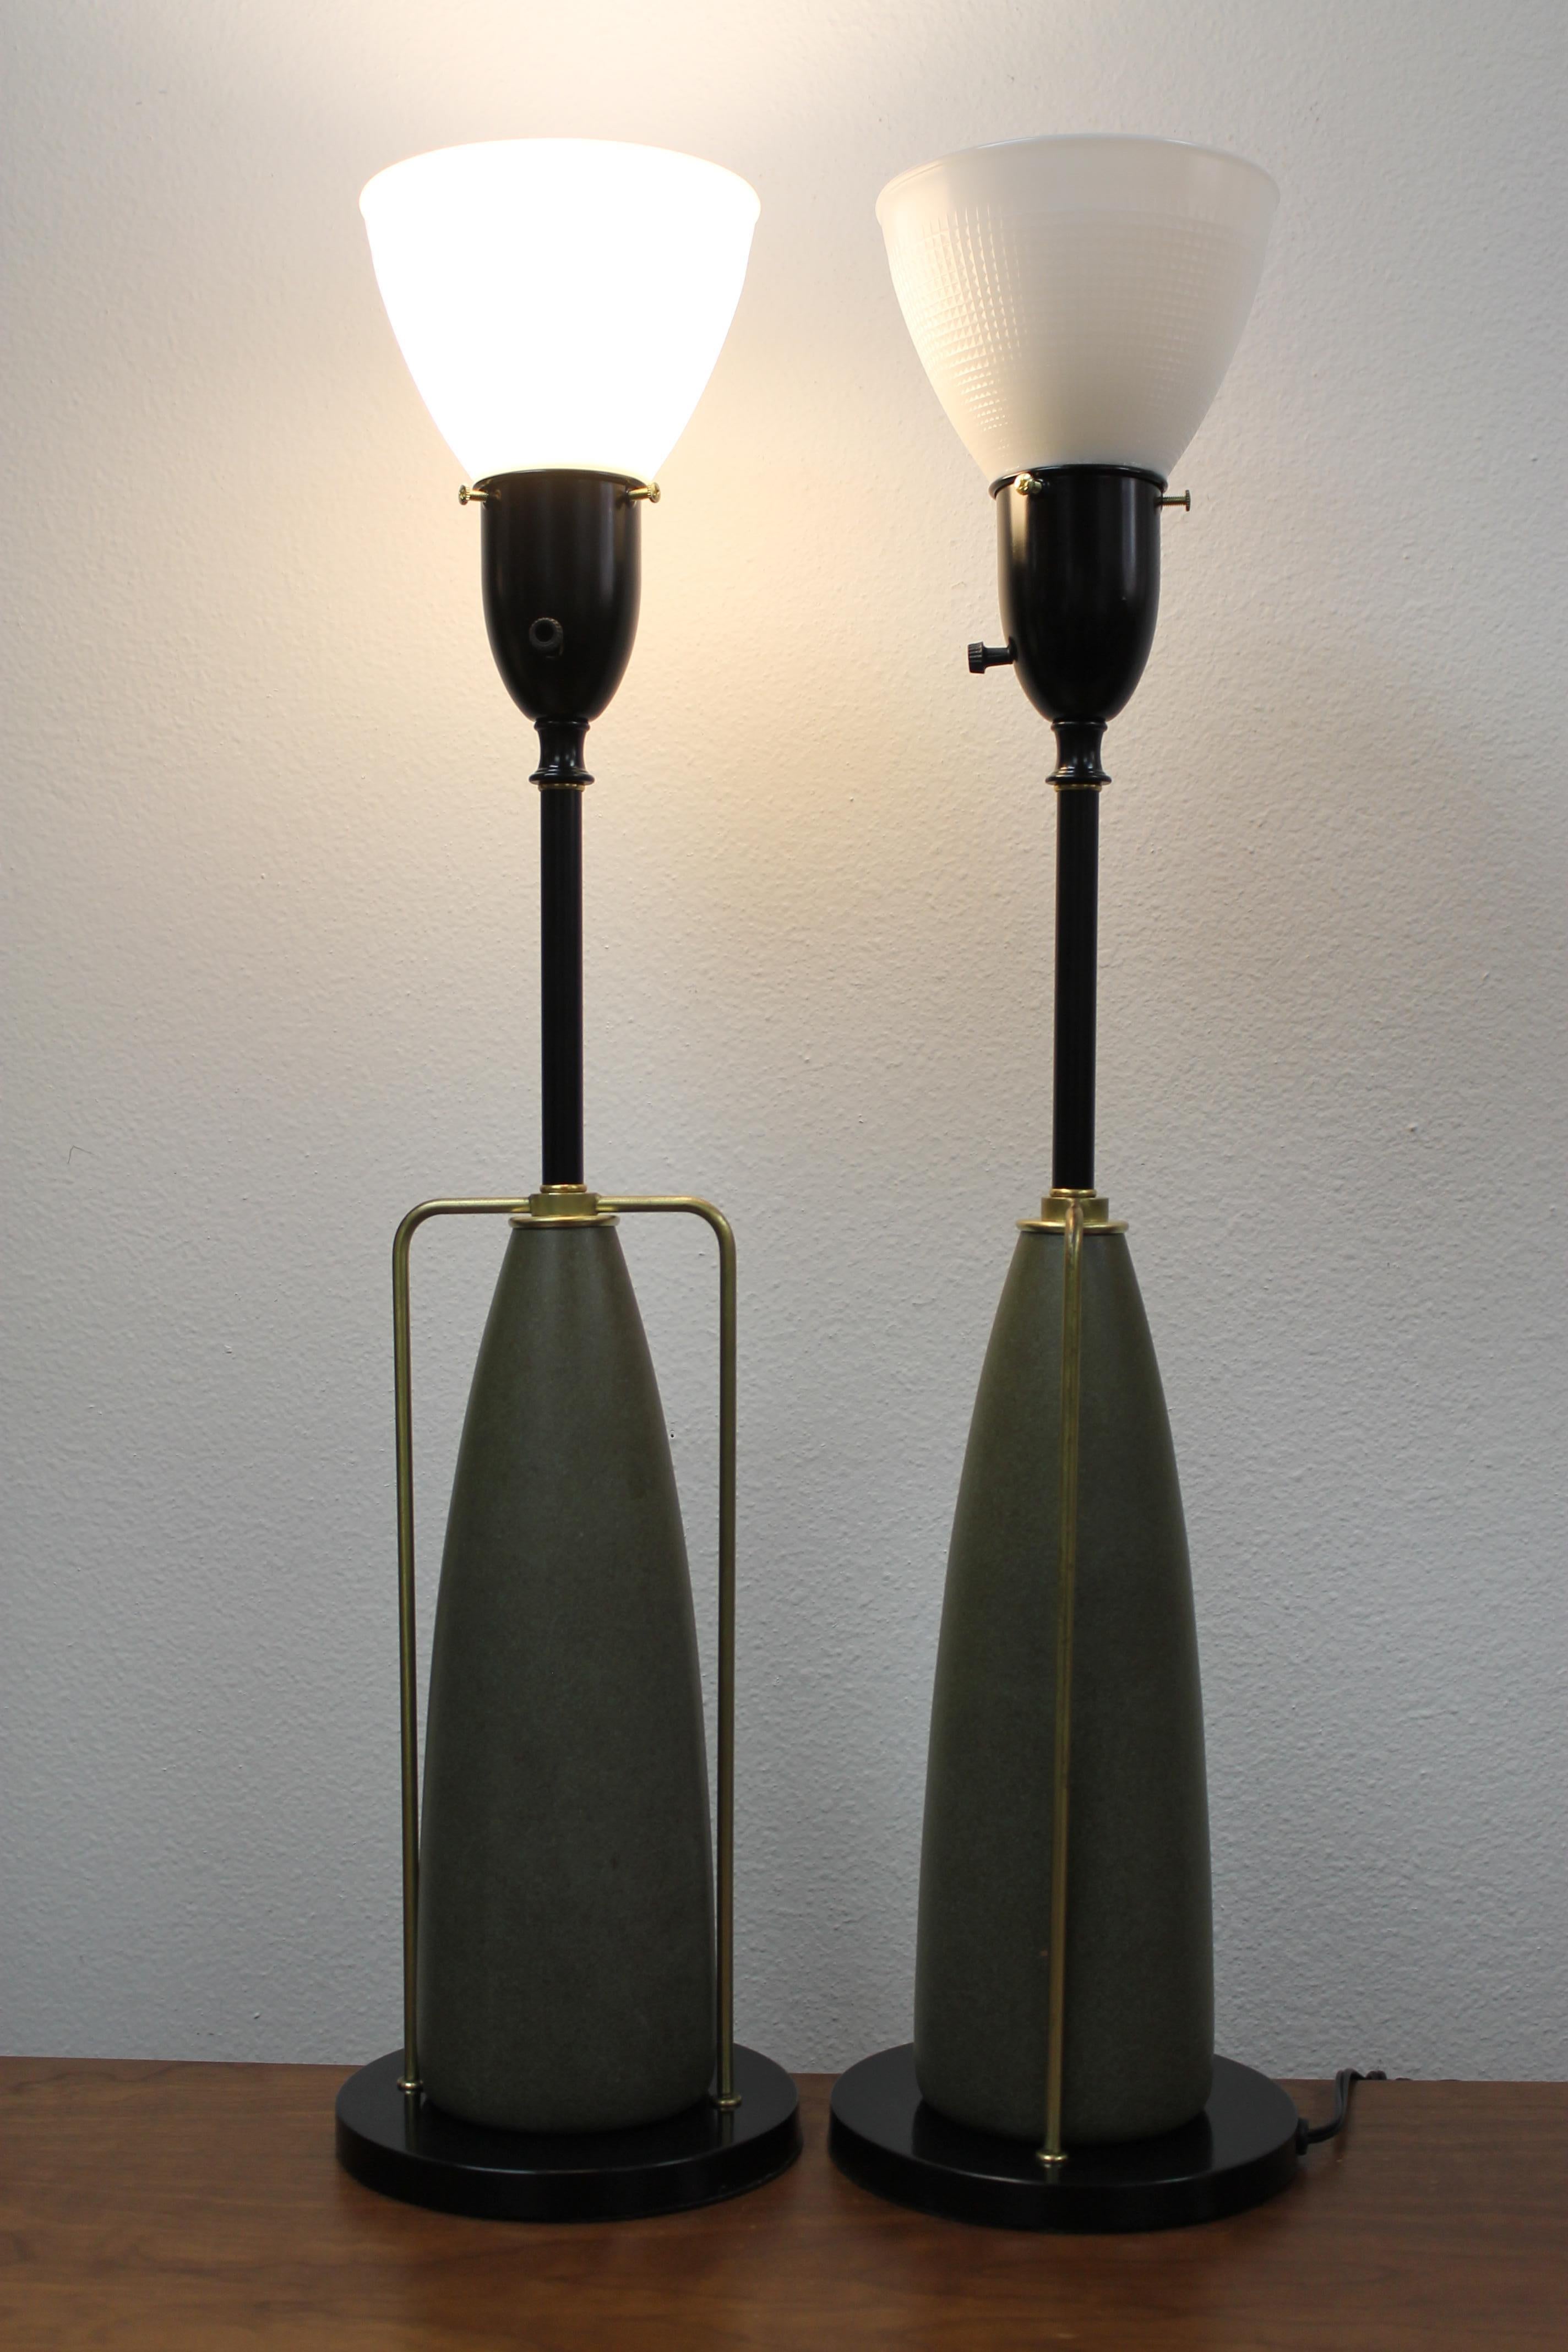 Pair of table lamps by the Rembrandt Lamp Company. The painted wood cones are accented by brass rod supports. Lamps are 7” diameter and 29” high from base to the top of glass globe. Lamps have been professionally refurbished and rewired for 3-way